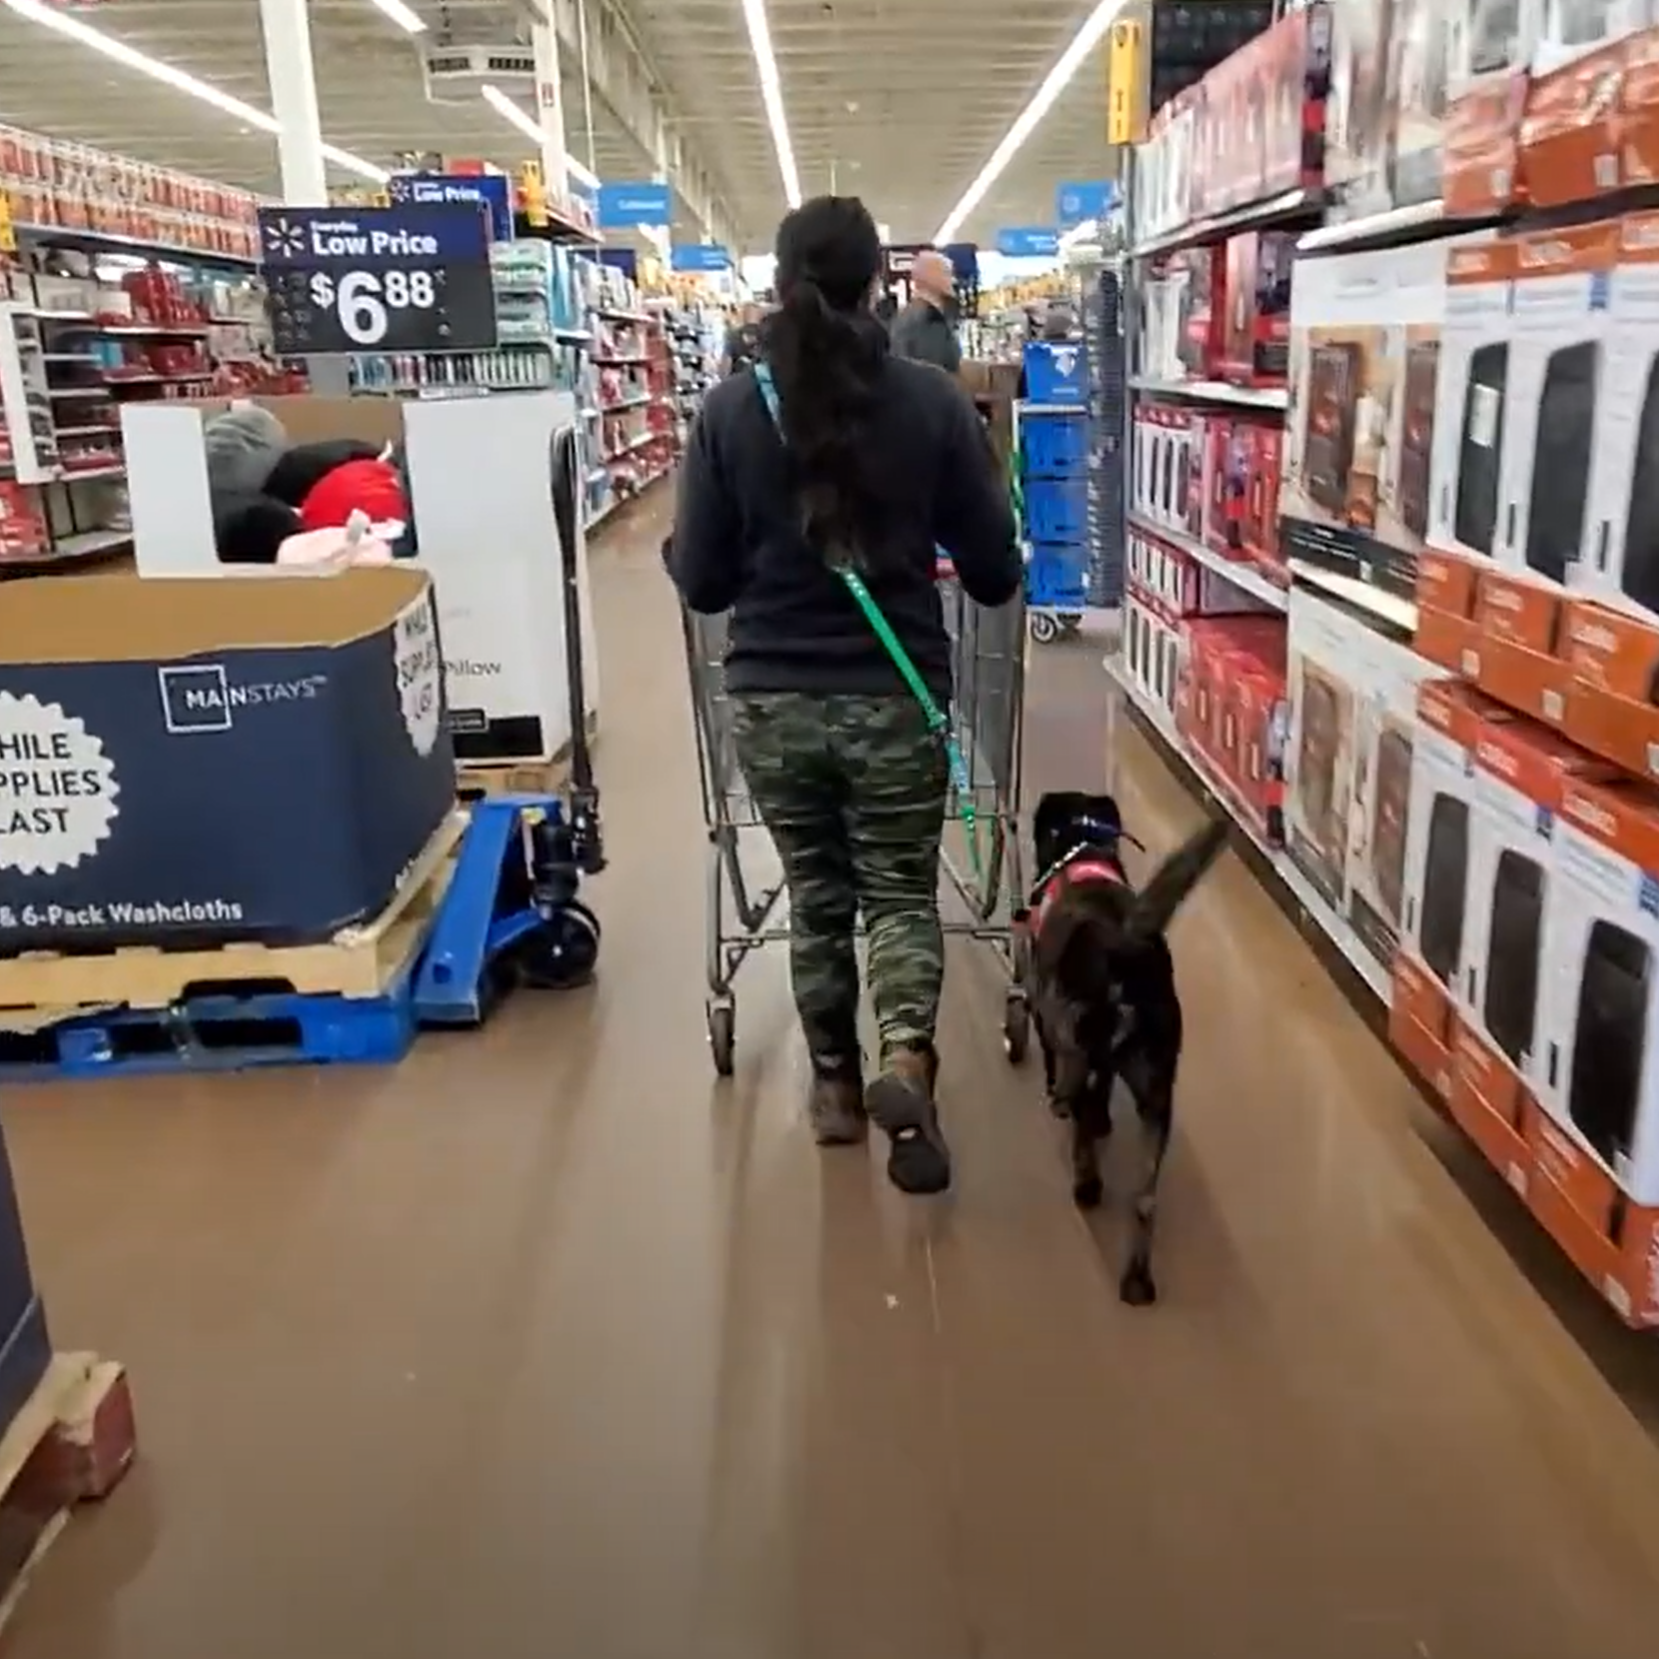 Service Dog follows trainer in supermarket during Public Access Training